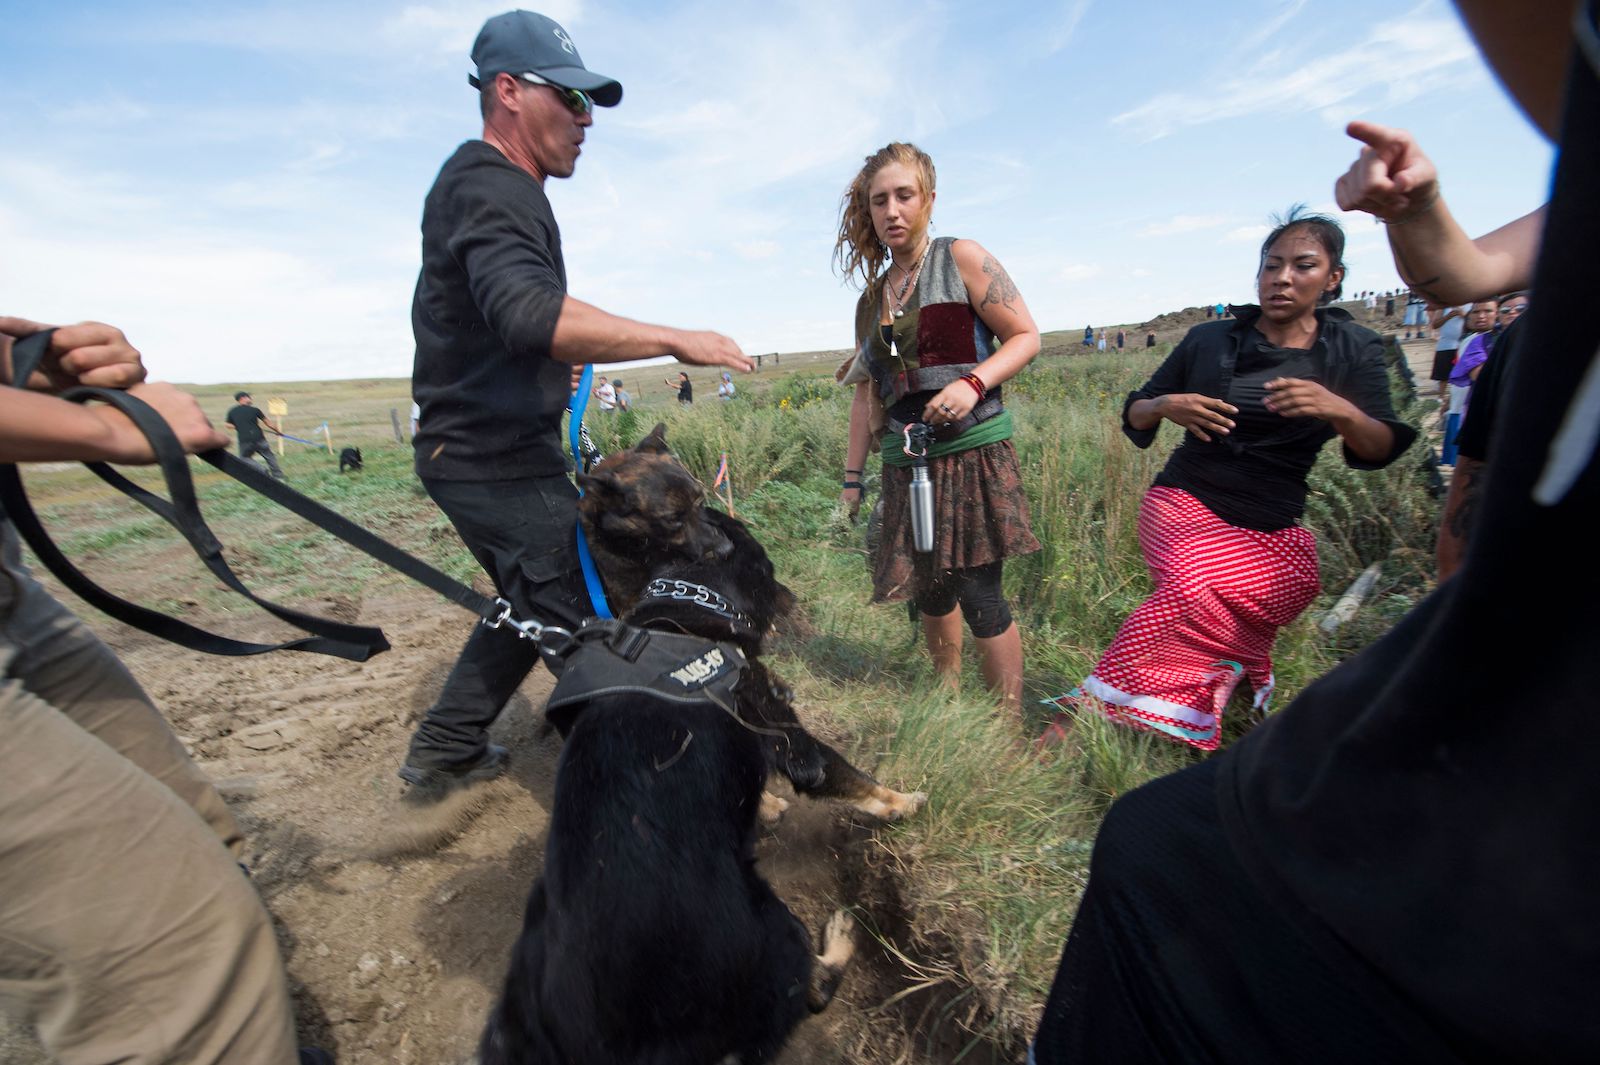 security guards hold dogs lunging at protesters in a field